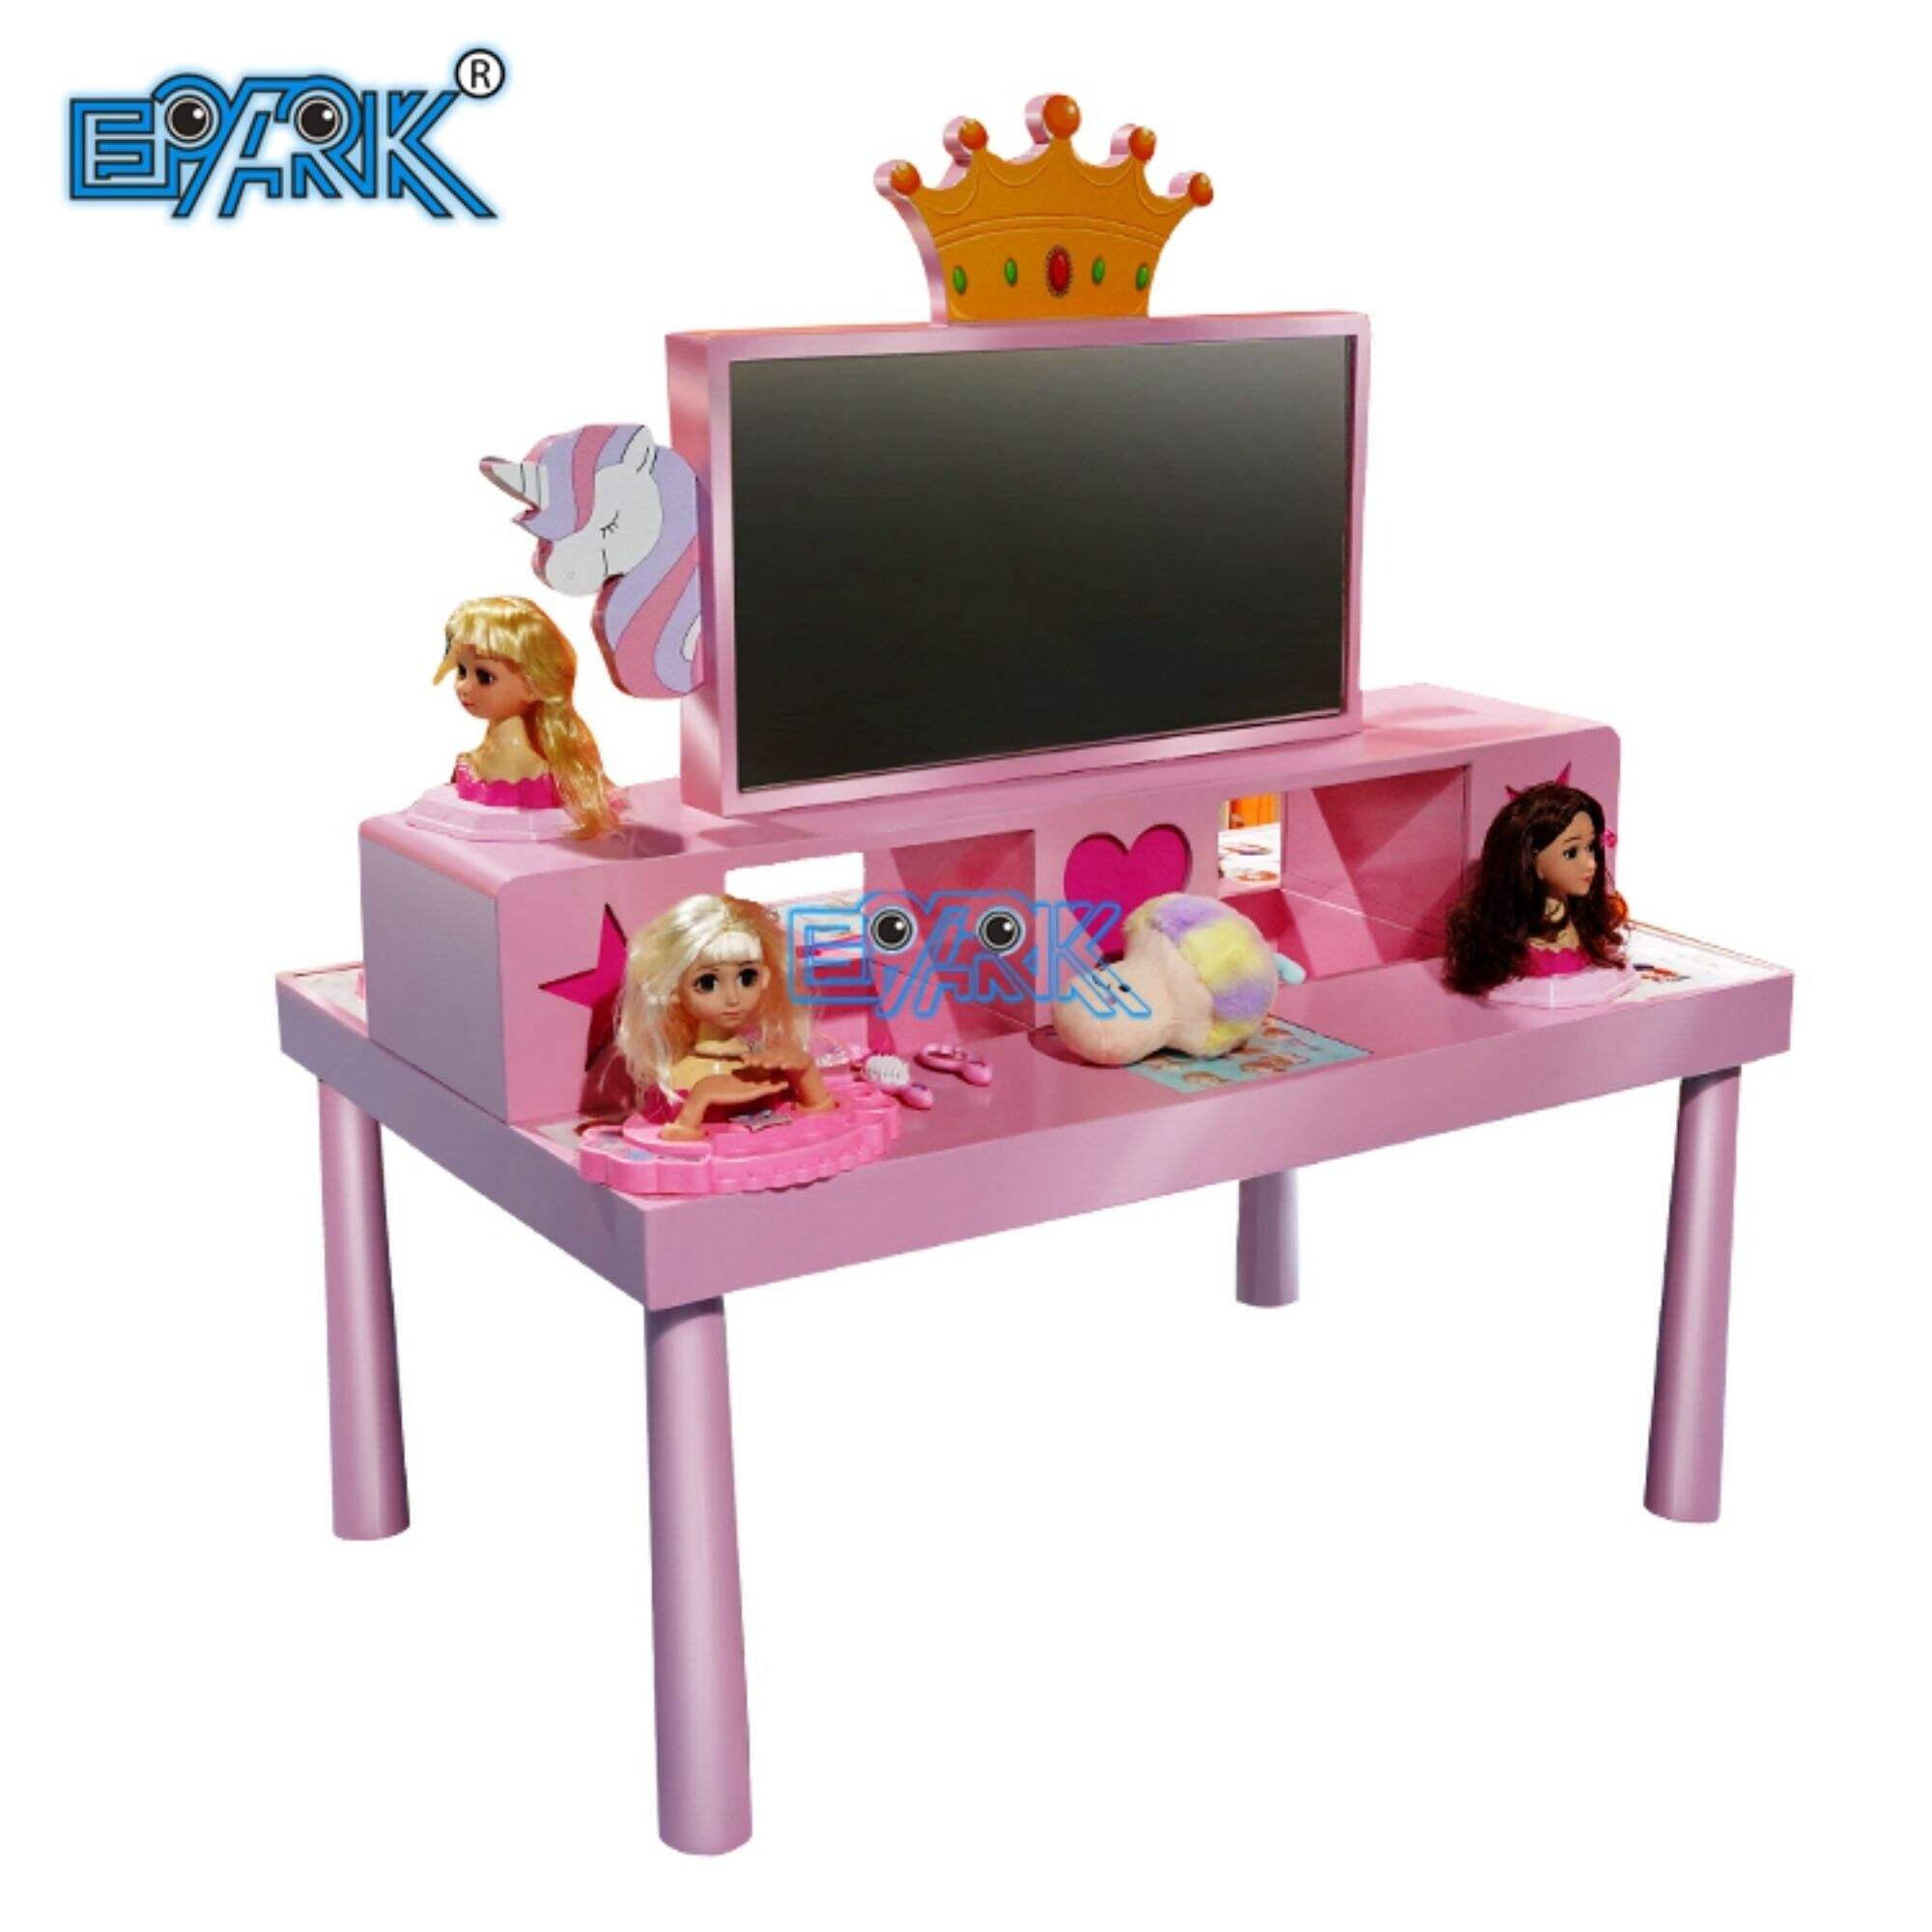 Education Wooden Toy Table Furniture For Children'S Playrooms